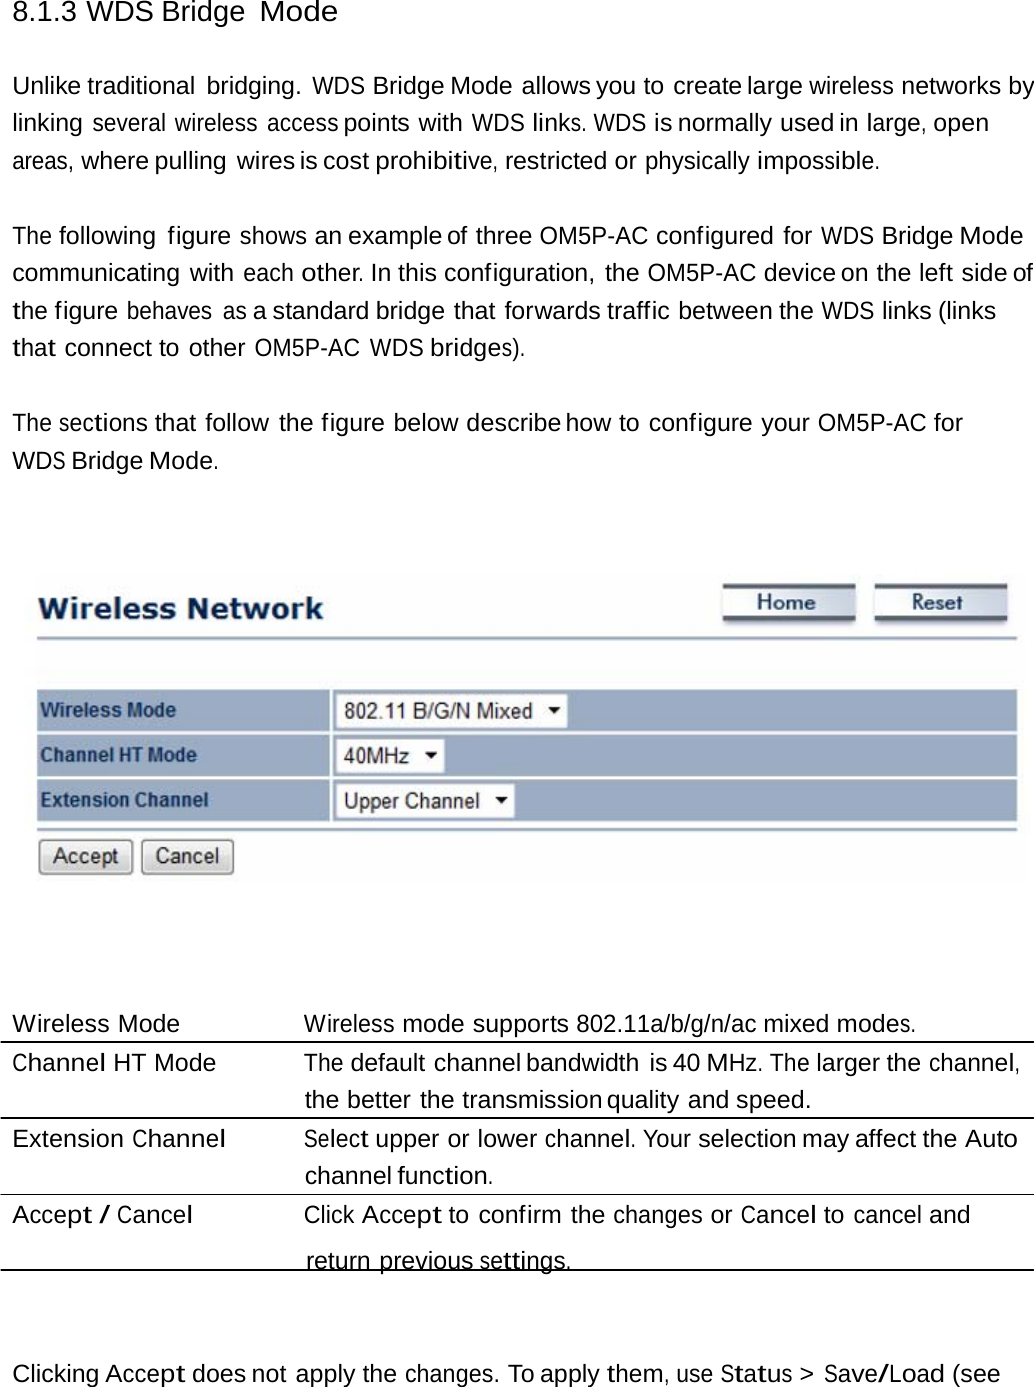 8.1.3 WDS Bridge Mode Unlike traditional  bridging. WDS Bridge Mode allows you to create large wireless networks by linking several wireless access points with WDS links. WDS is normally used in large, open areas, where pulling  wires is cost prohibitive, restricted or physically impossible. The following figure shows an example of three OM5P-AC configured for WDS Bridge Mode communicating with each other. In this configuration, the OM5P-AC device on the left  side of the figure behaves as a standard bridge that forwards traffic between the WDS links (links that connect to other OM5P-AC WDS bridges). The sections that follow the figure below describe how  to  configure  your OM5P-AC for WDS Bridge Mode. Wireless Mode  Wireless mode supports 802.11a/b/g/n/ac mixed modes. Channel HT Mode  The default channel bandwidth is 40 MHz. The larger the channel, the better the transmission quality and speed. Extension Channel Select upper or lower channel. Your selection may affect the Auto channel function. Accept / Cancel Click Accept to confirm the changes or Cancel to cancel and return previous settings. Clicking Accept does not apply the changes. To apply them, use Status &gt; Save/Load (see 